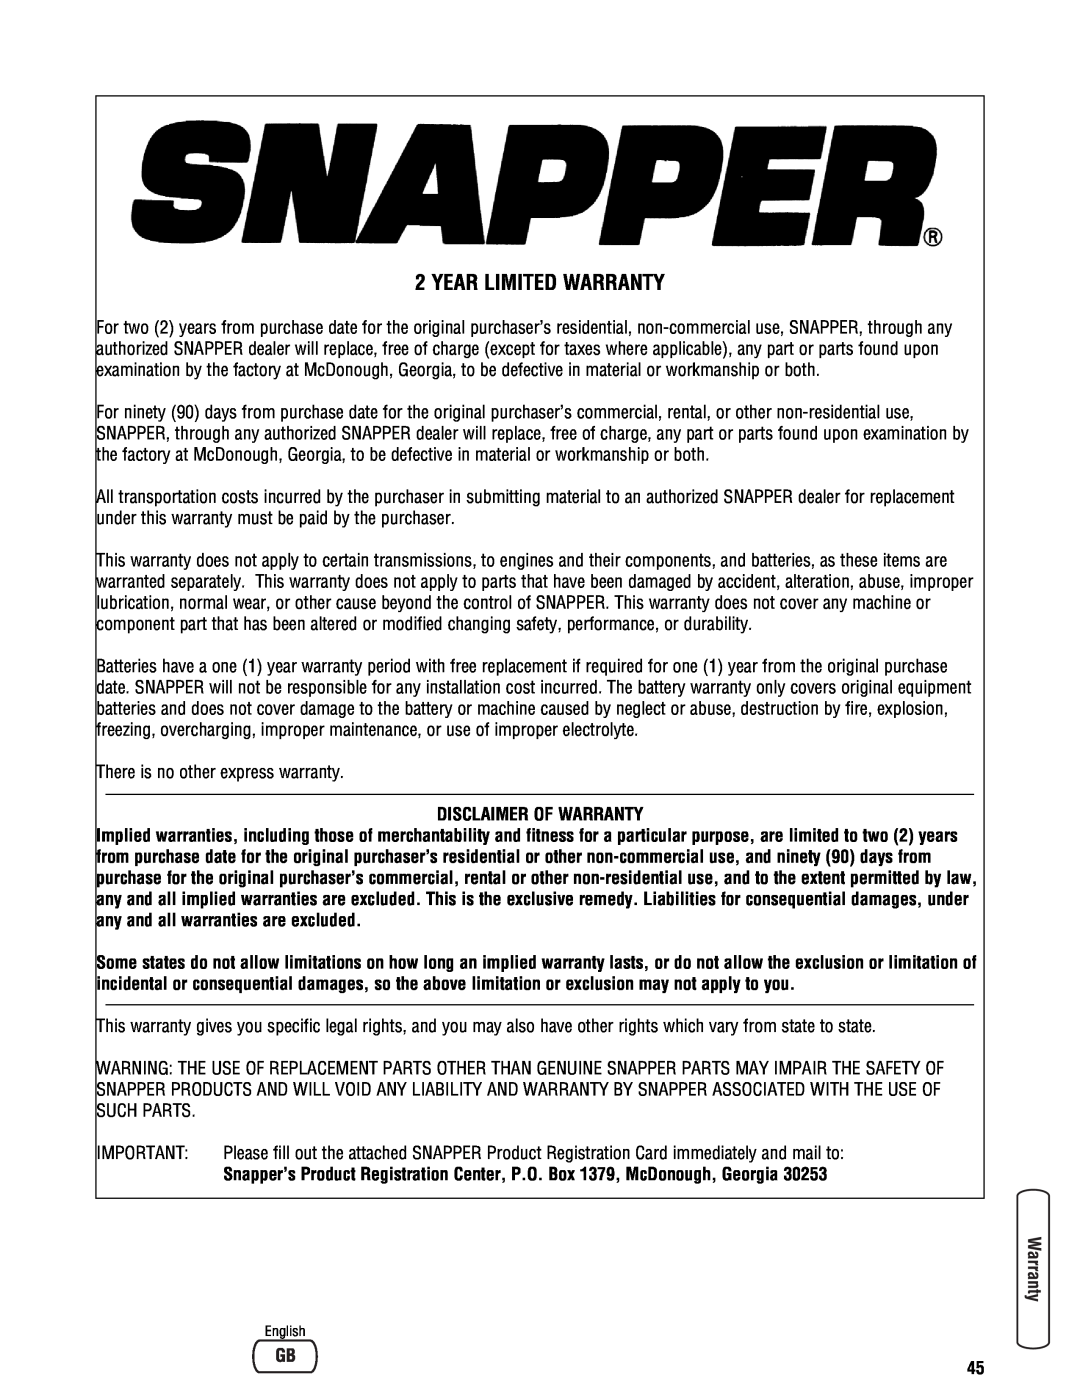 Snapper specifications Year Limited Warranty, Disclaimer Of Warranty 